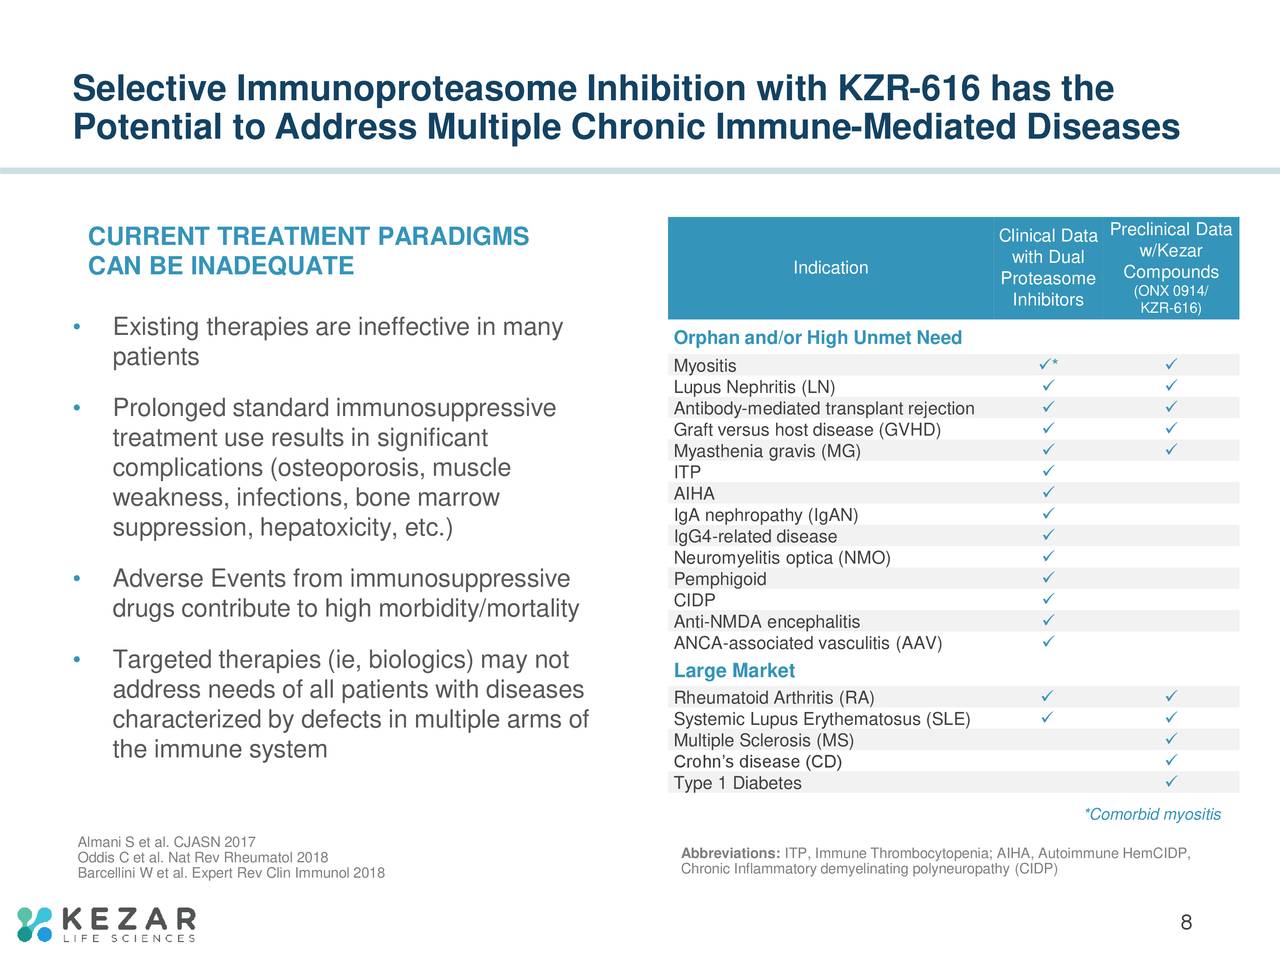 Selective Immunoproteasome Inhibition with KZR-616 has the